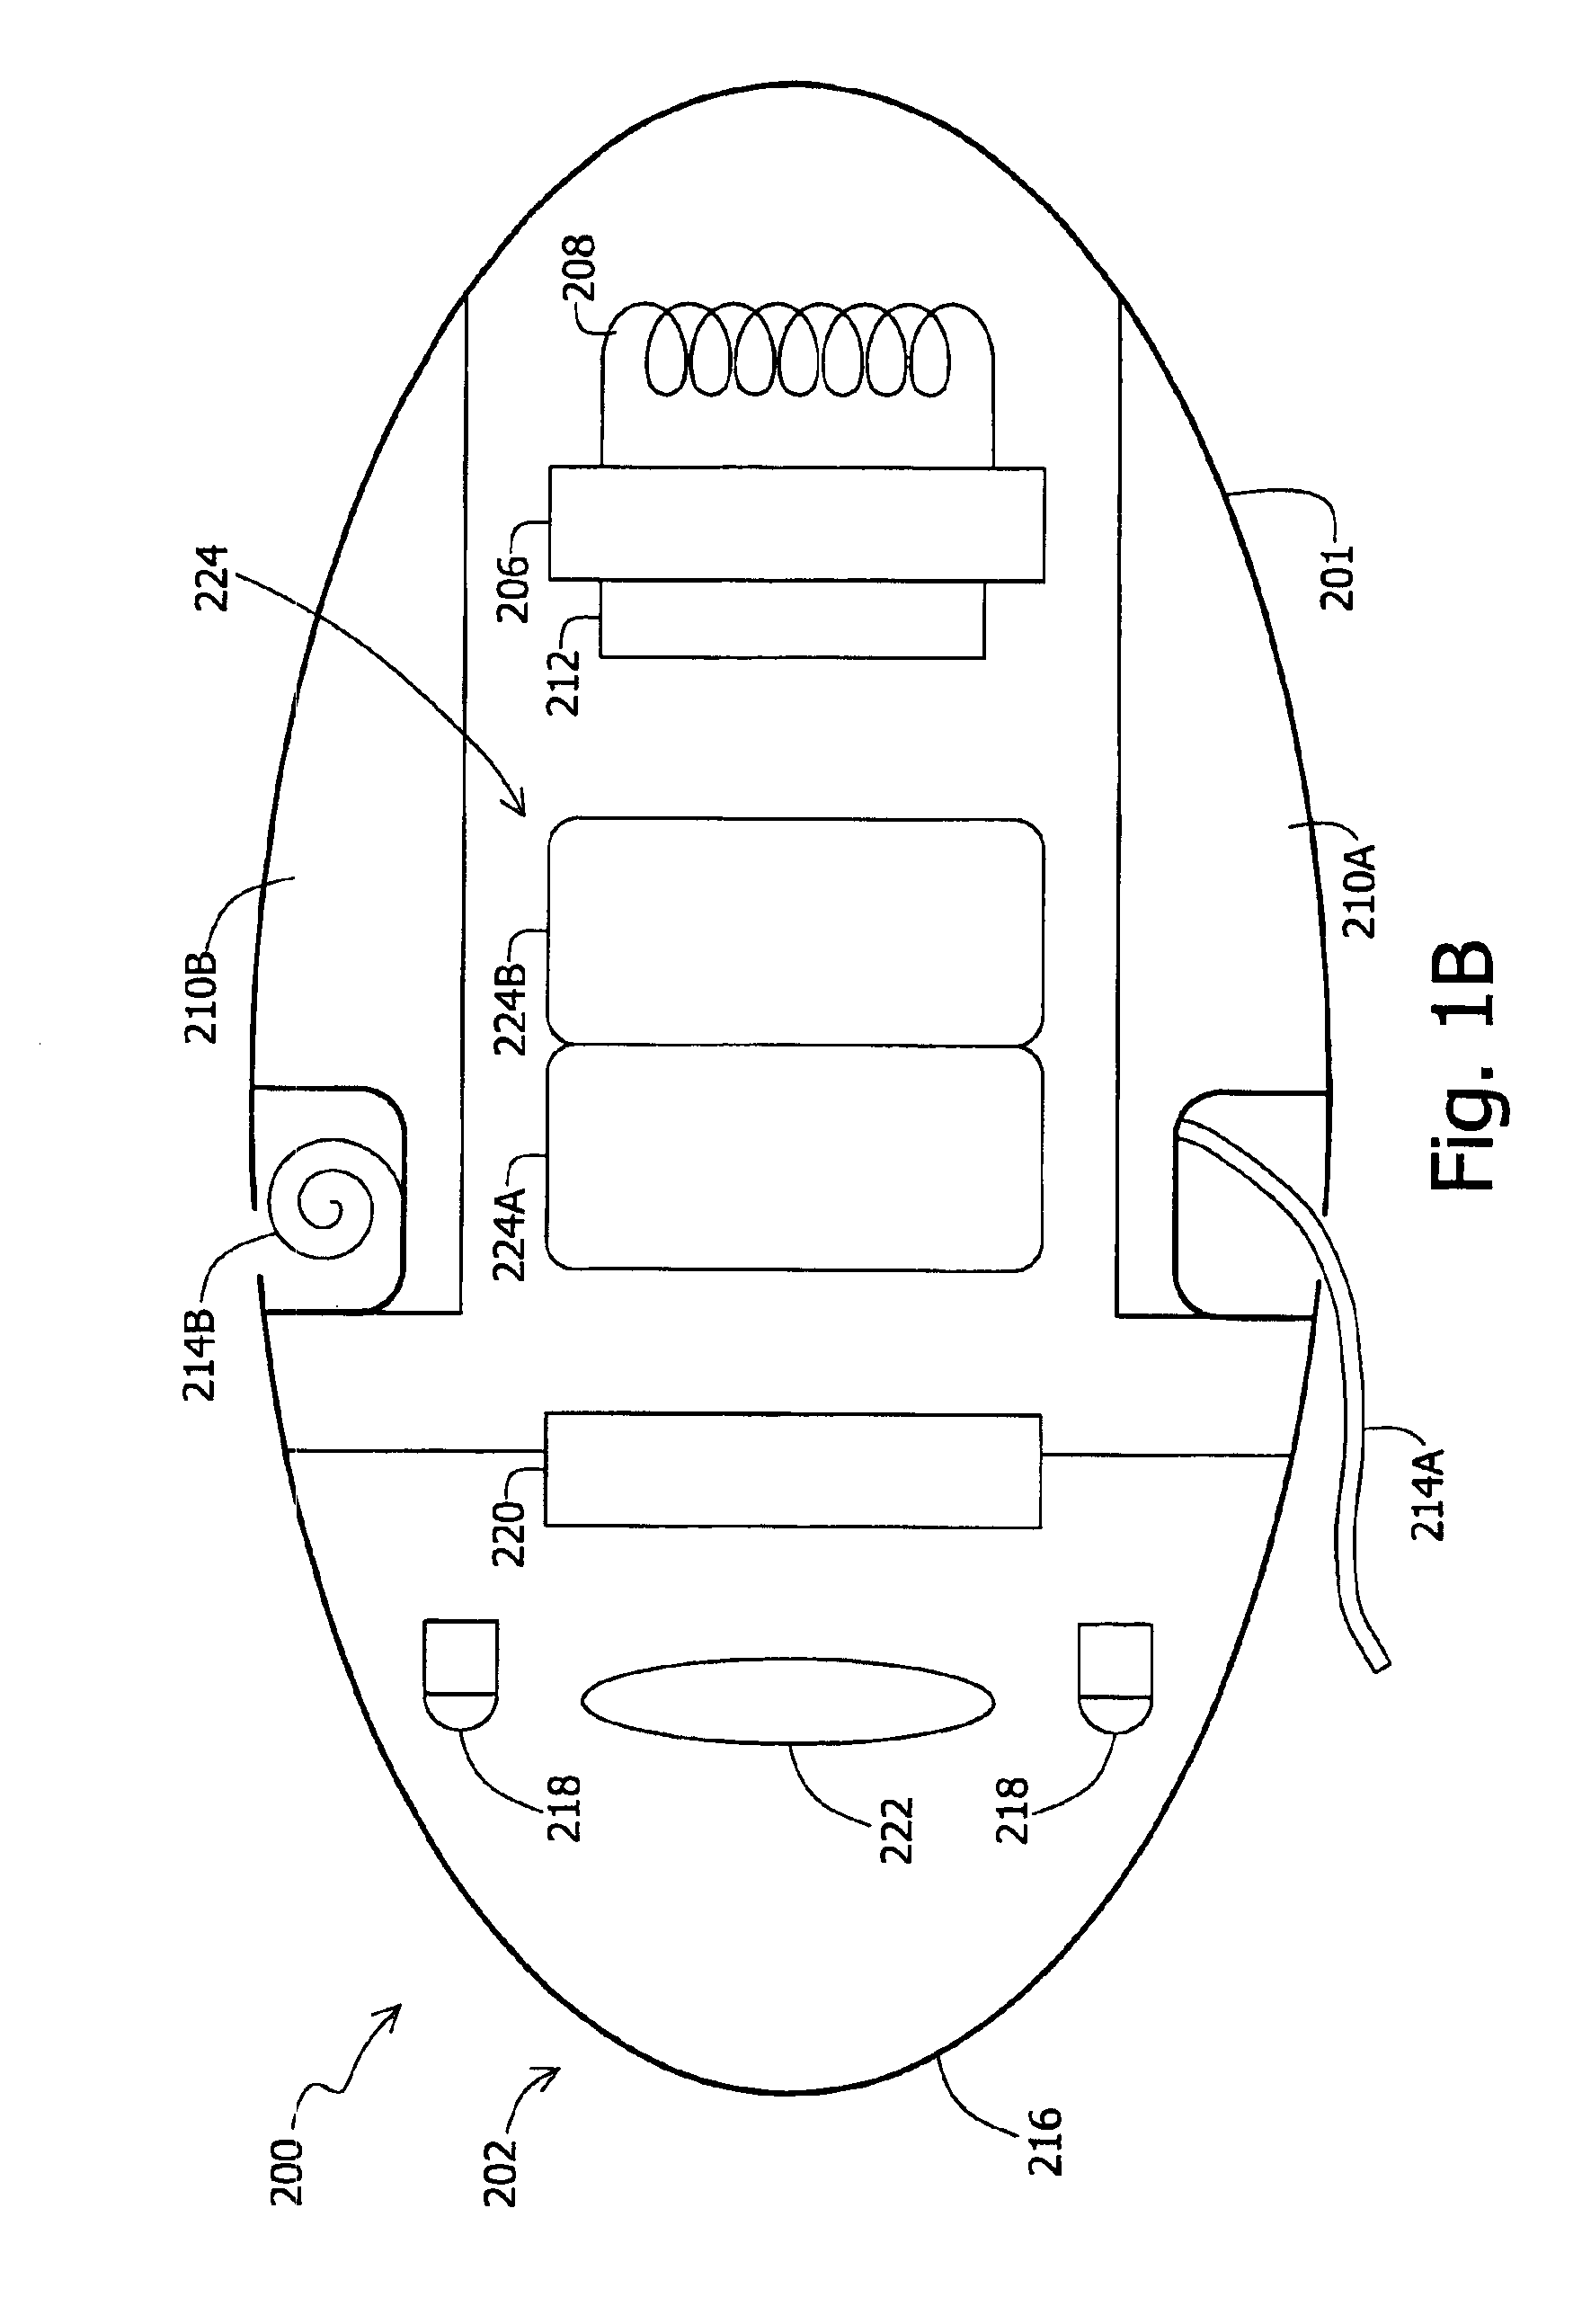 In-vivo extendable element device and system, and method of use